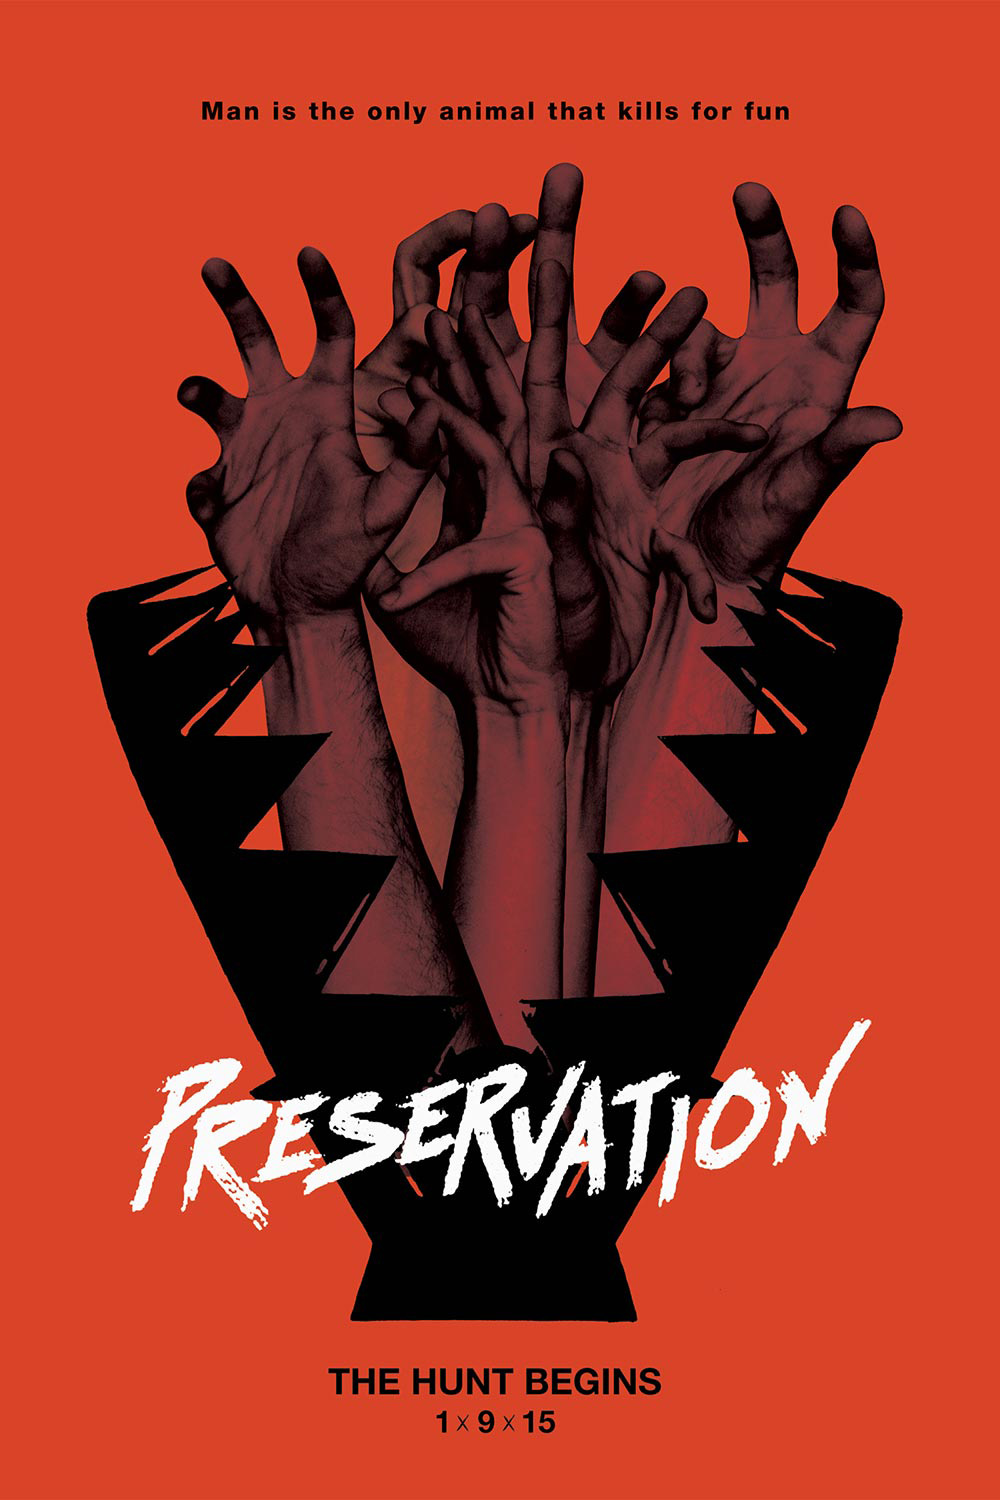 Movie poster for Reservation, hands reaching out of a bear trap